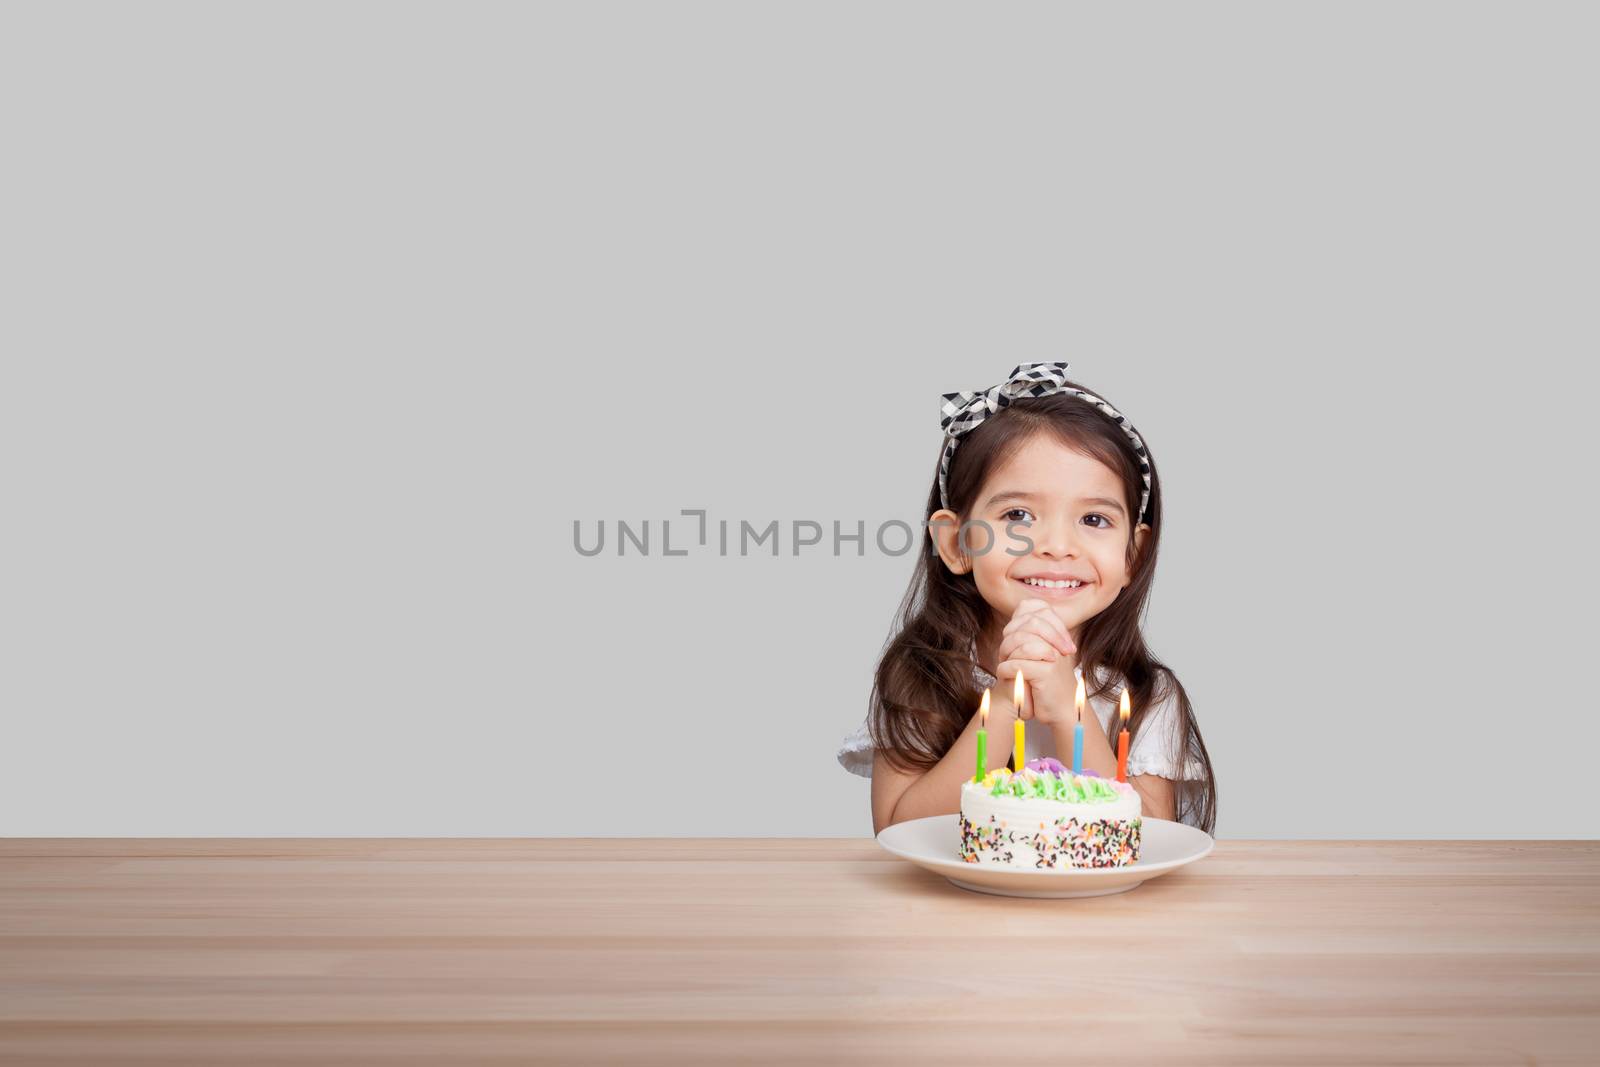 cute girl make a wish on birthday. Happy Birthday background. Greeting background for card, flyer, poster, sign, banner, web, postcard, invitation. Abstract fest background for text, type, quote